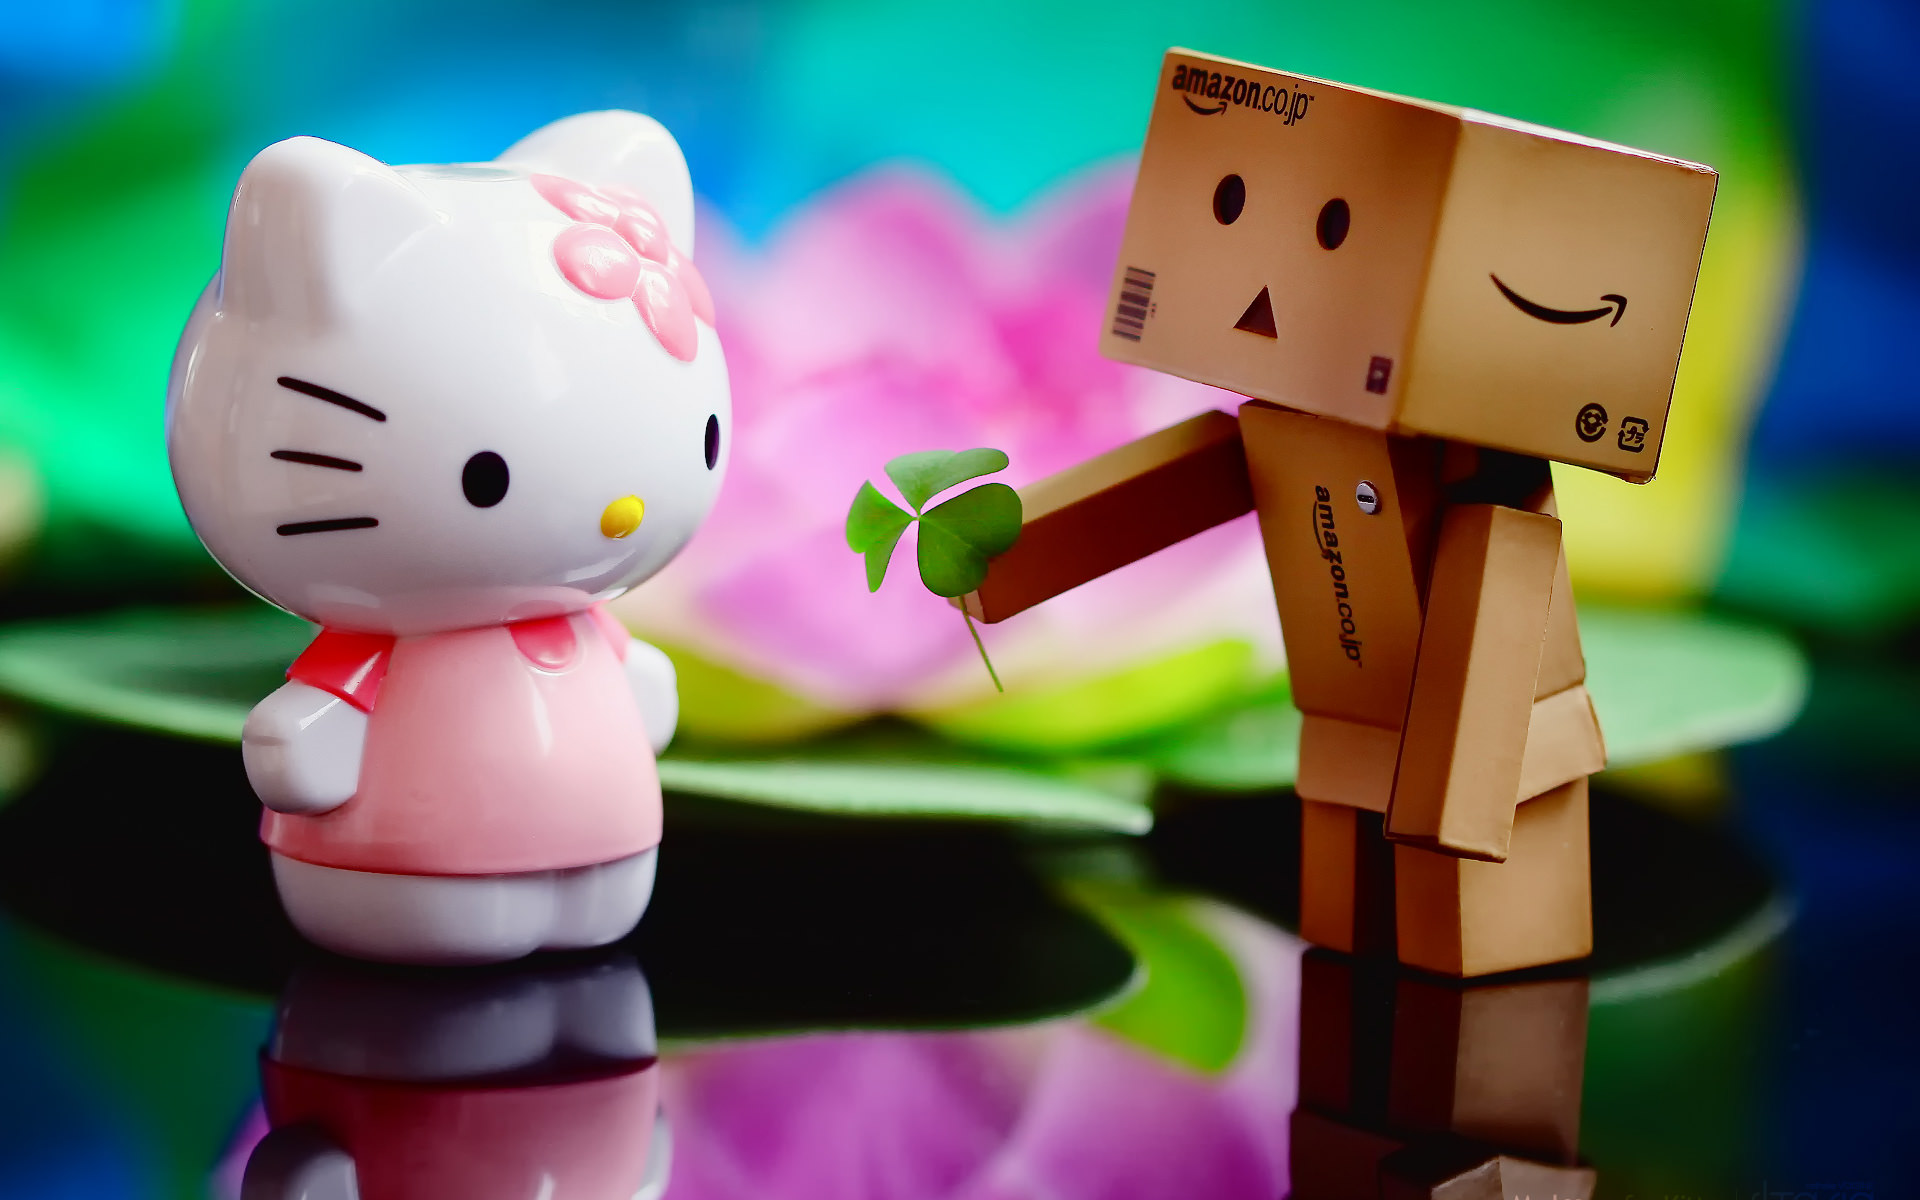 HD wallpaper hello kitty images background pink color representation no  people  Wallpaper Flare